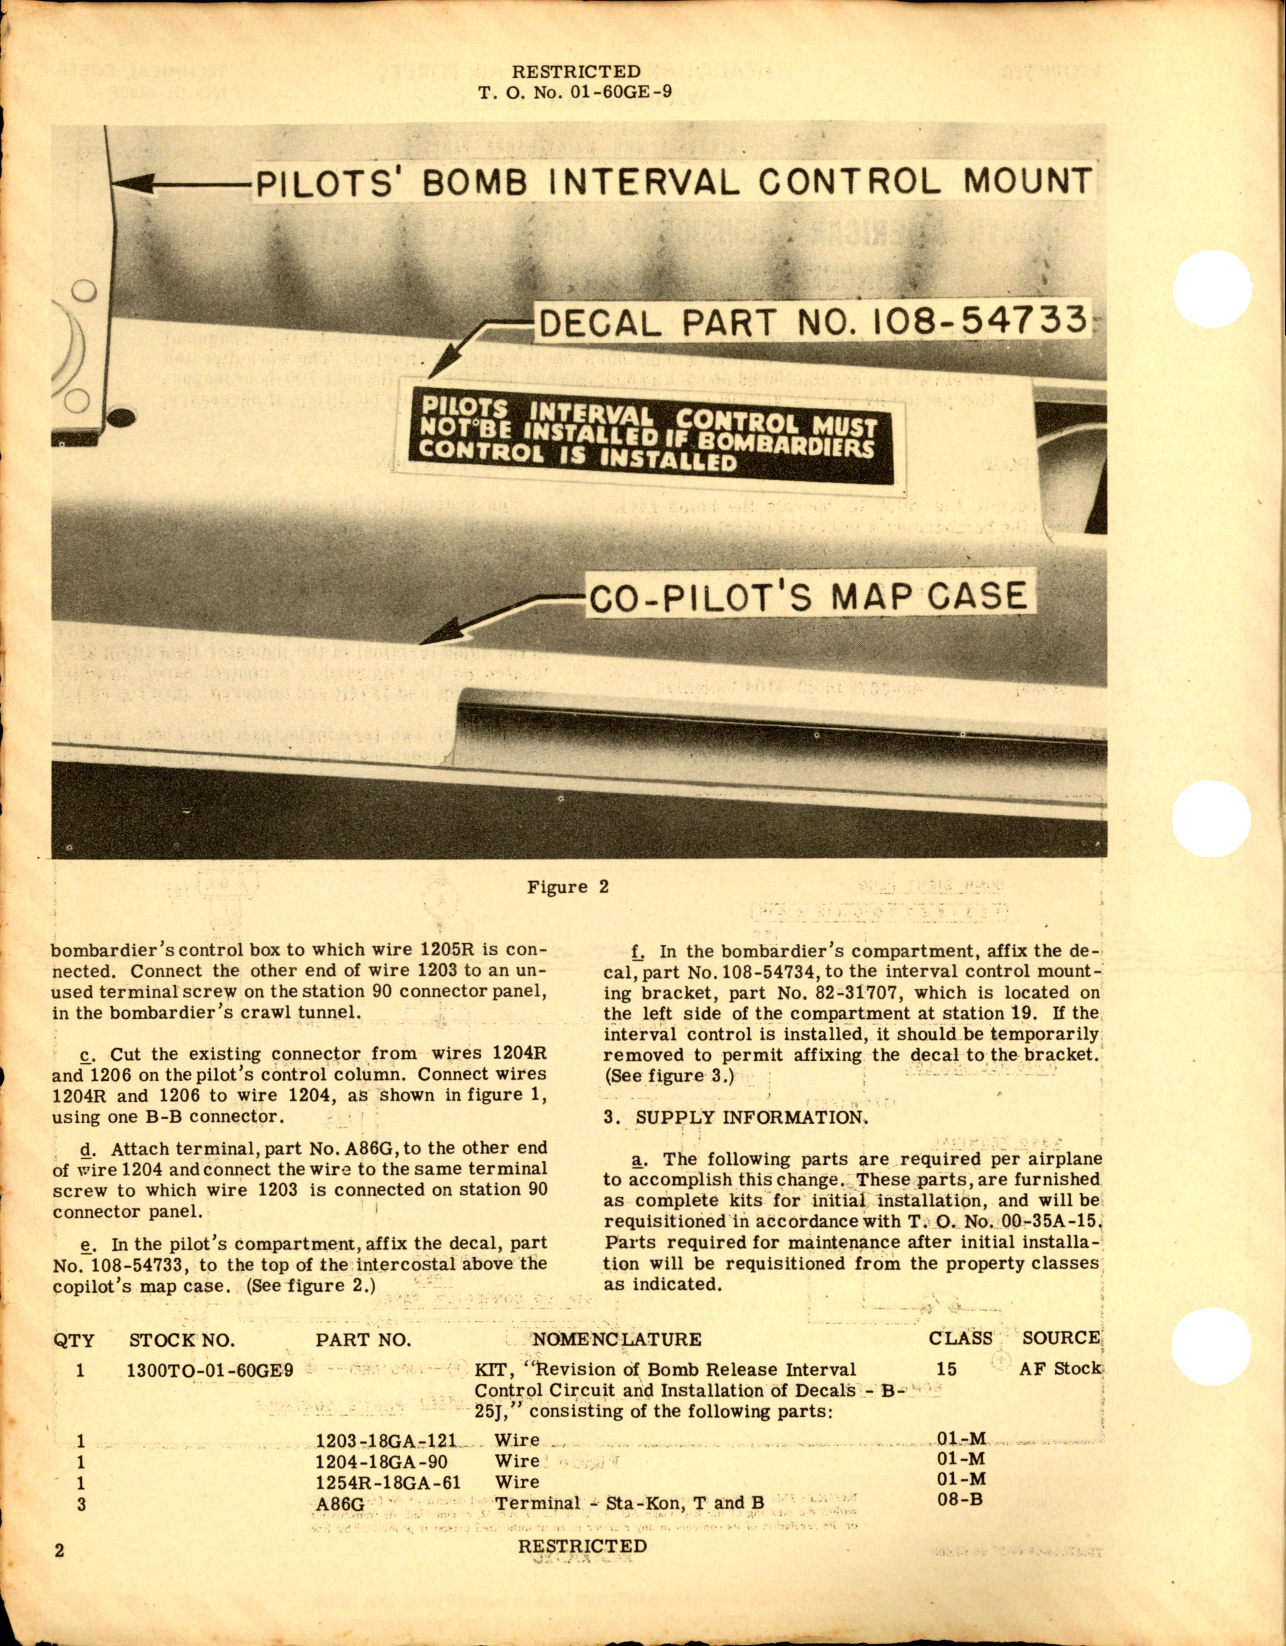 Sample page 2 from AirCorps Library document: Bomb Release Circuit & Installation of Decals for B-25J